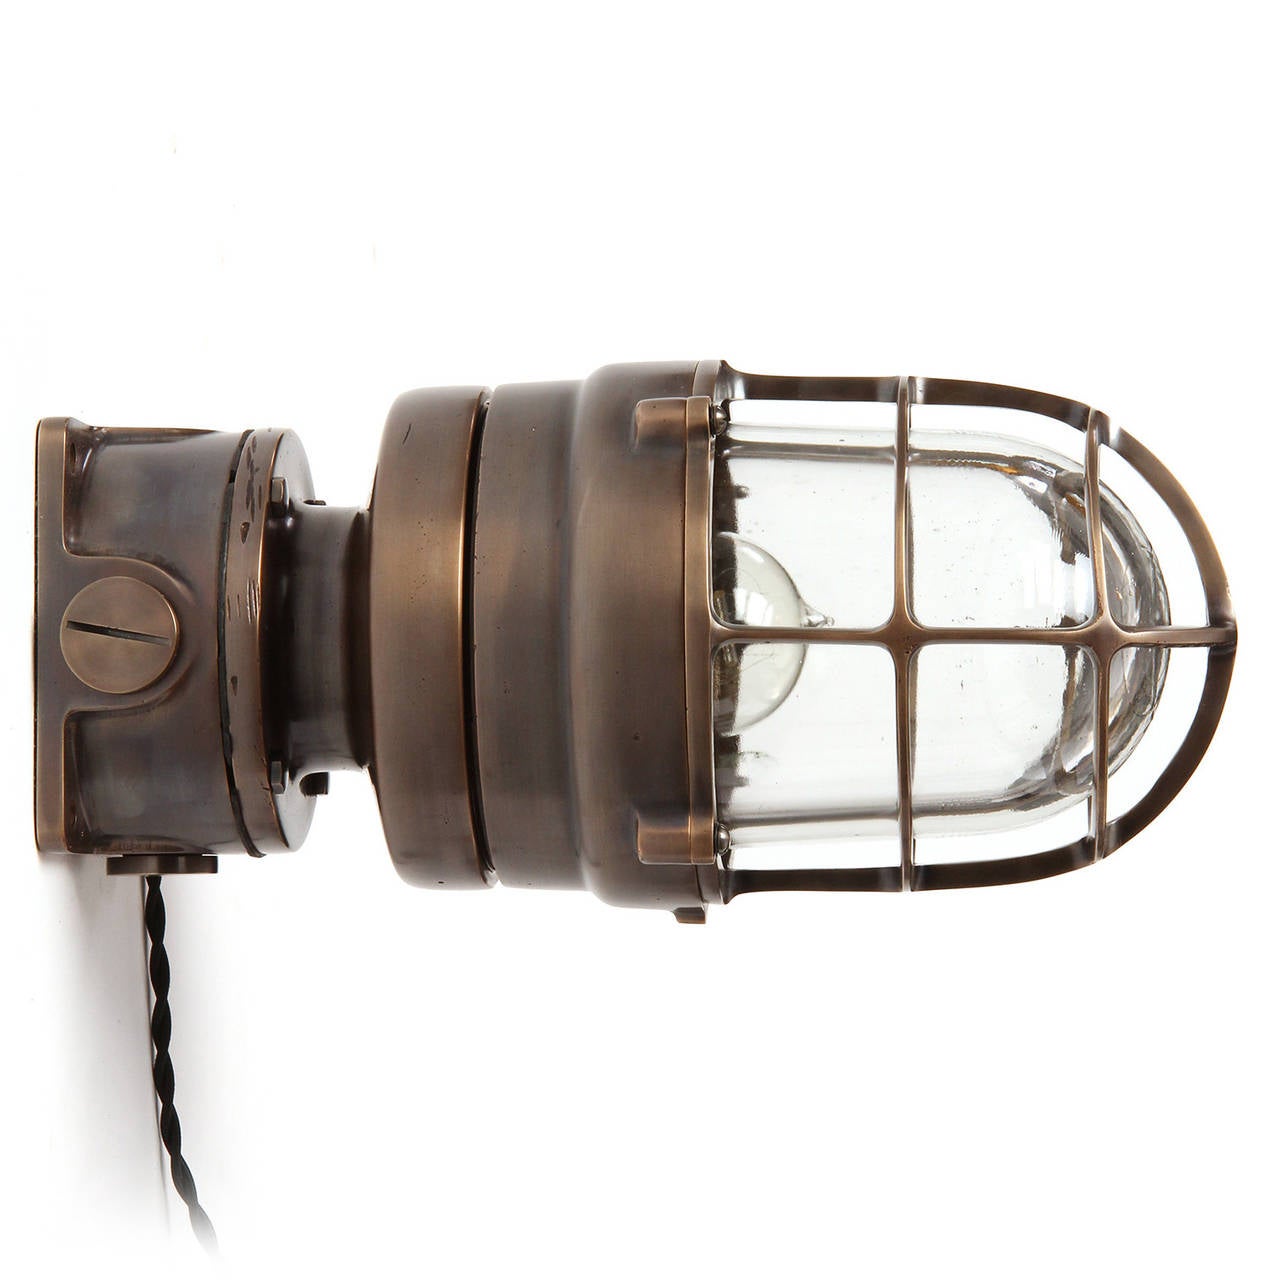 A substantial patinated and polished industrial bronze sconce of great quality, having a thick clear glass cage-encased light diffuser. This sconce can be wall or ceiling mounted, and also functions as a desktop light.